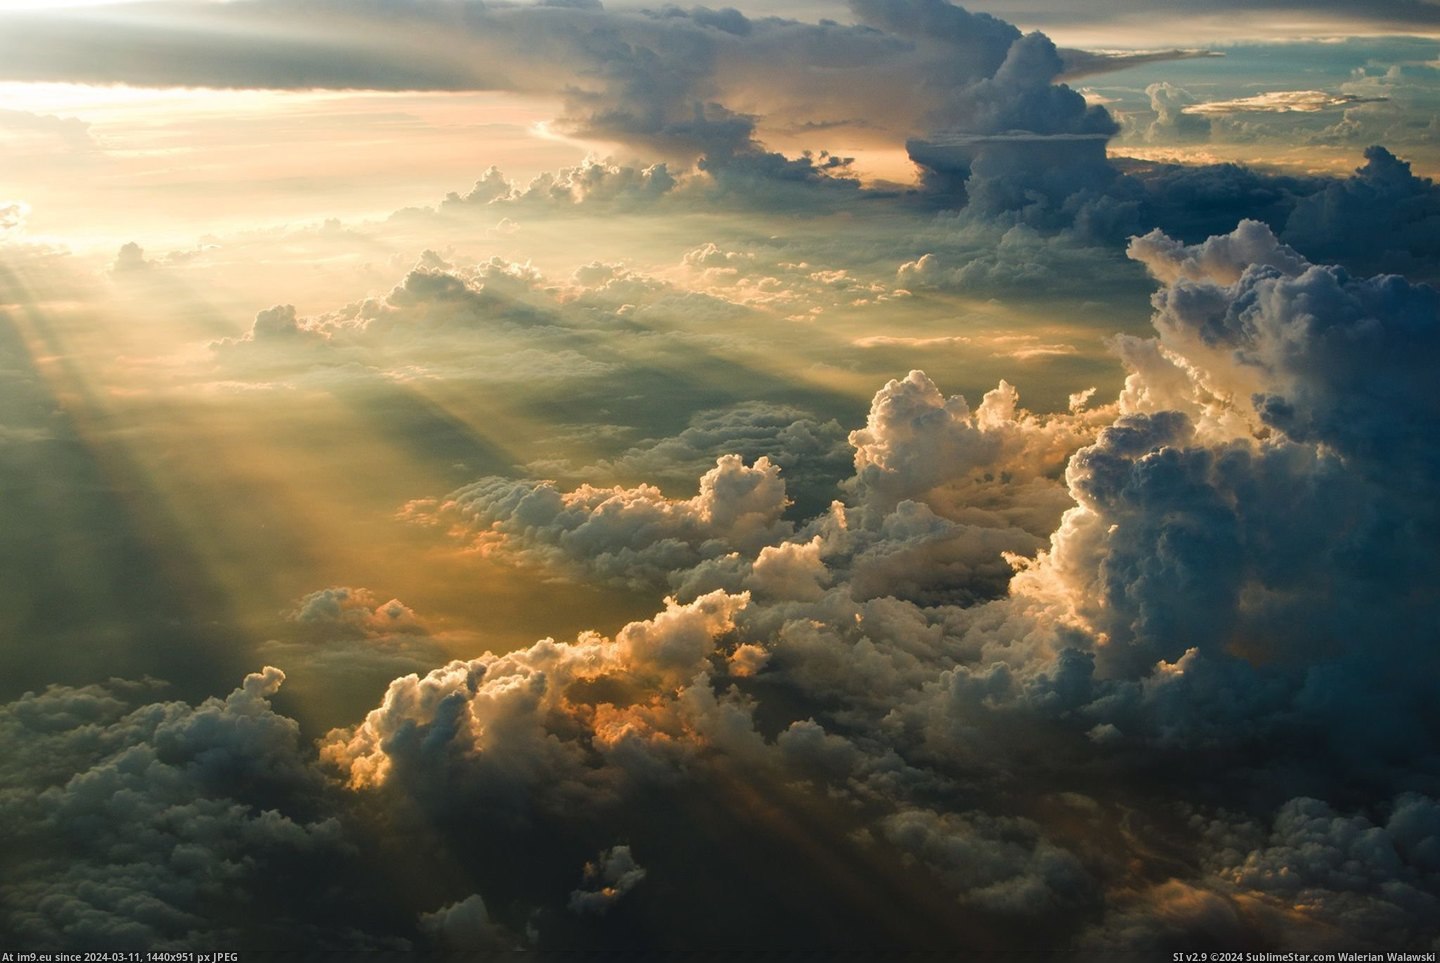 #Sunset #Clouds #Awesome [Pics] Awesome sunset over the clouds Pic. (Изображение из альбом My r/PICS favs))